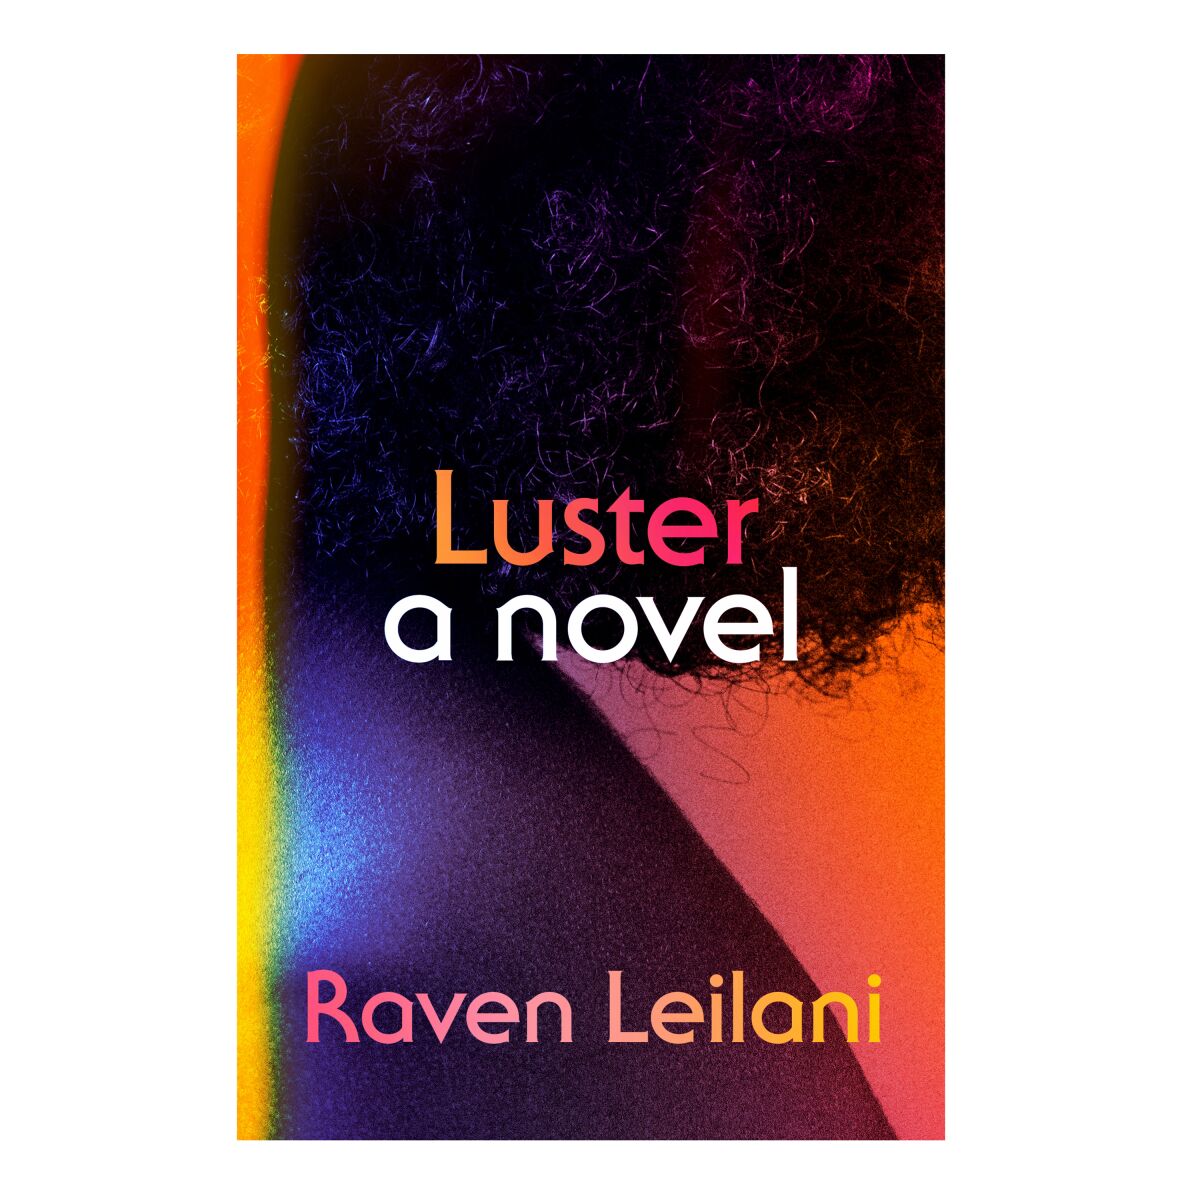 HOLIDAY GIFT GUIDE - Cover of the book Luster: A Novel by Raven Leilani.